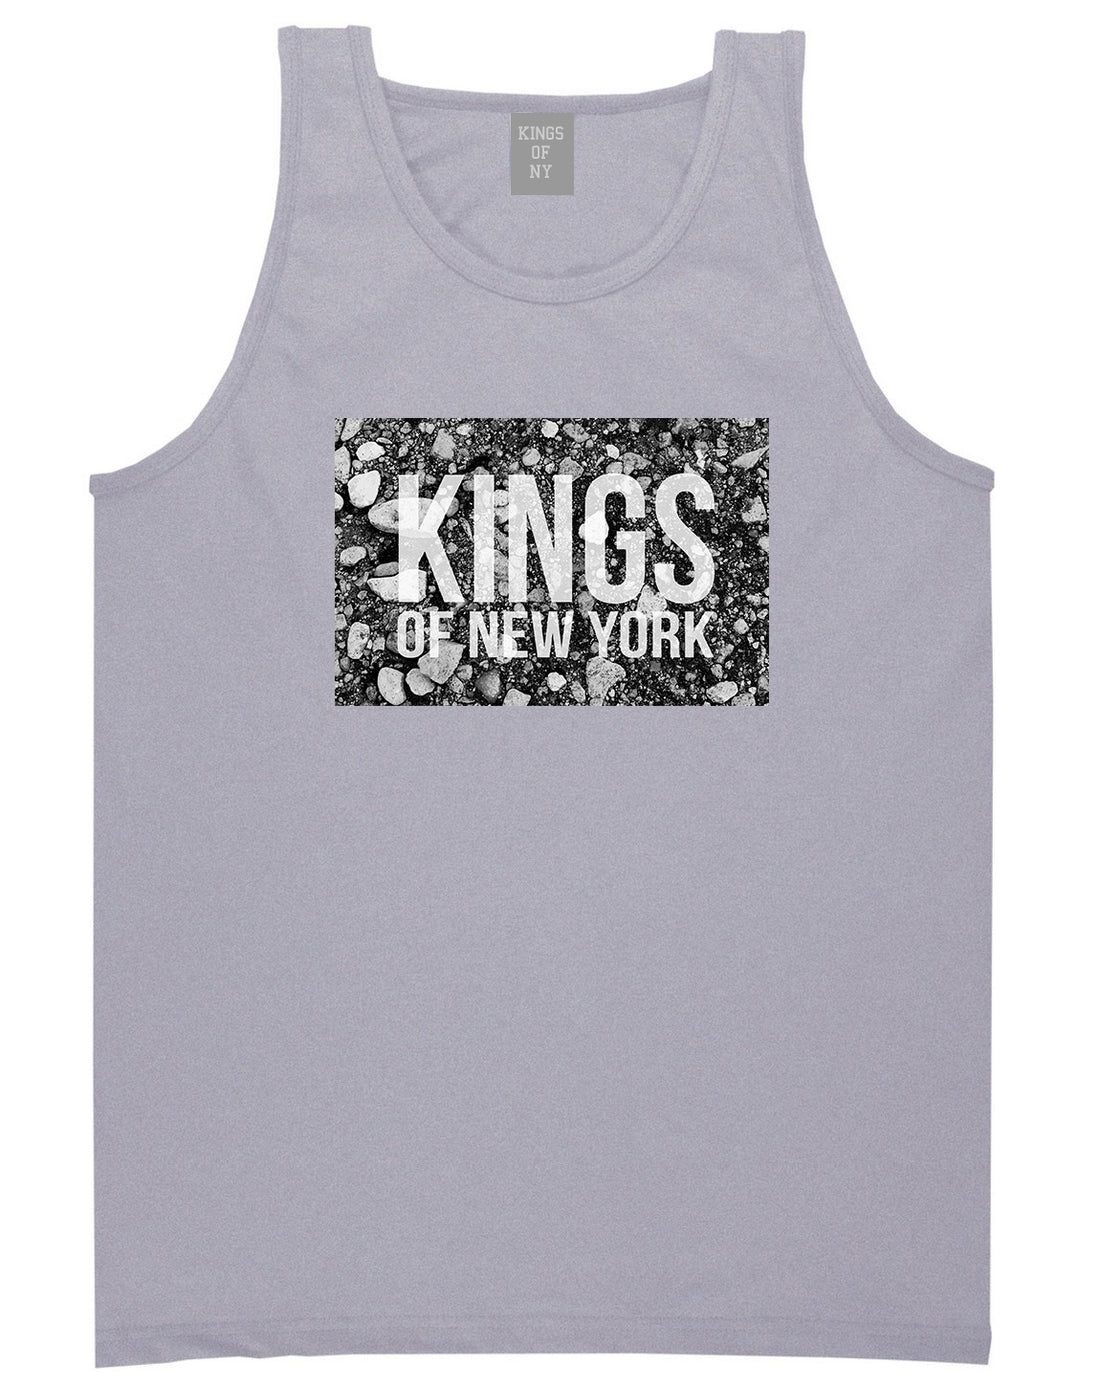 Came From The Dirt KONY Mens Tank Top Shirt Grey